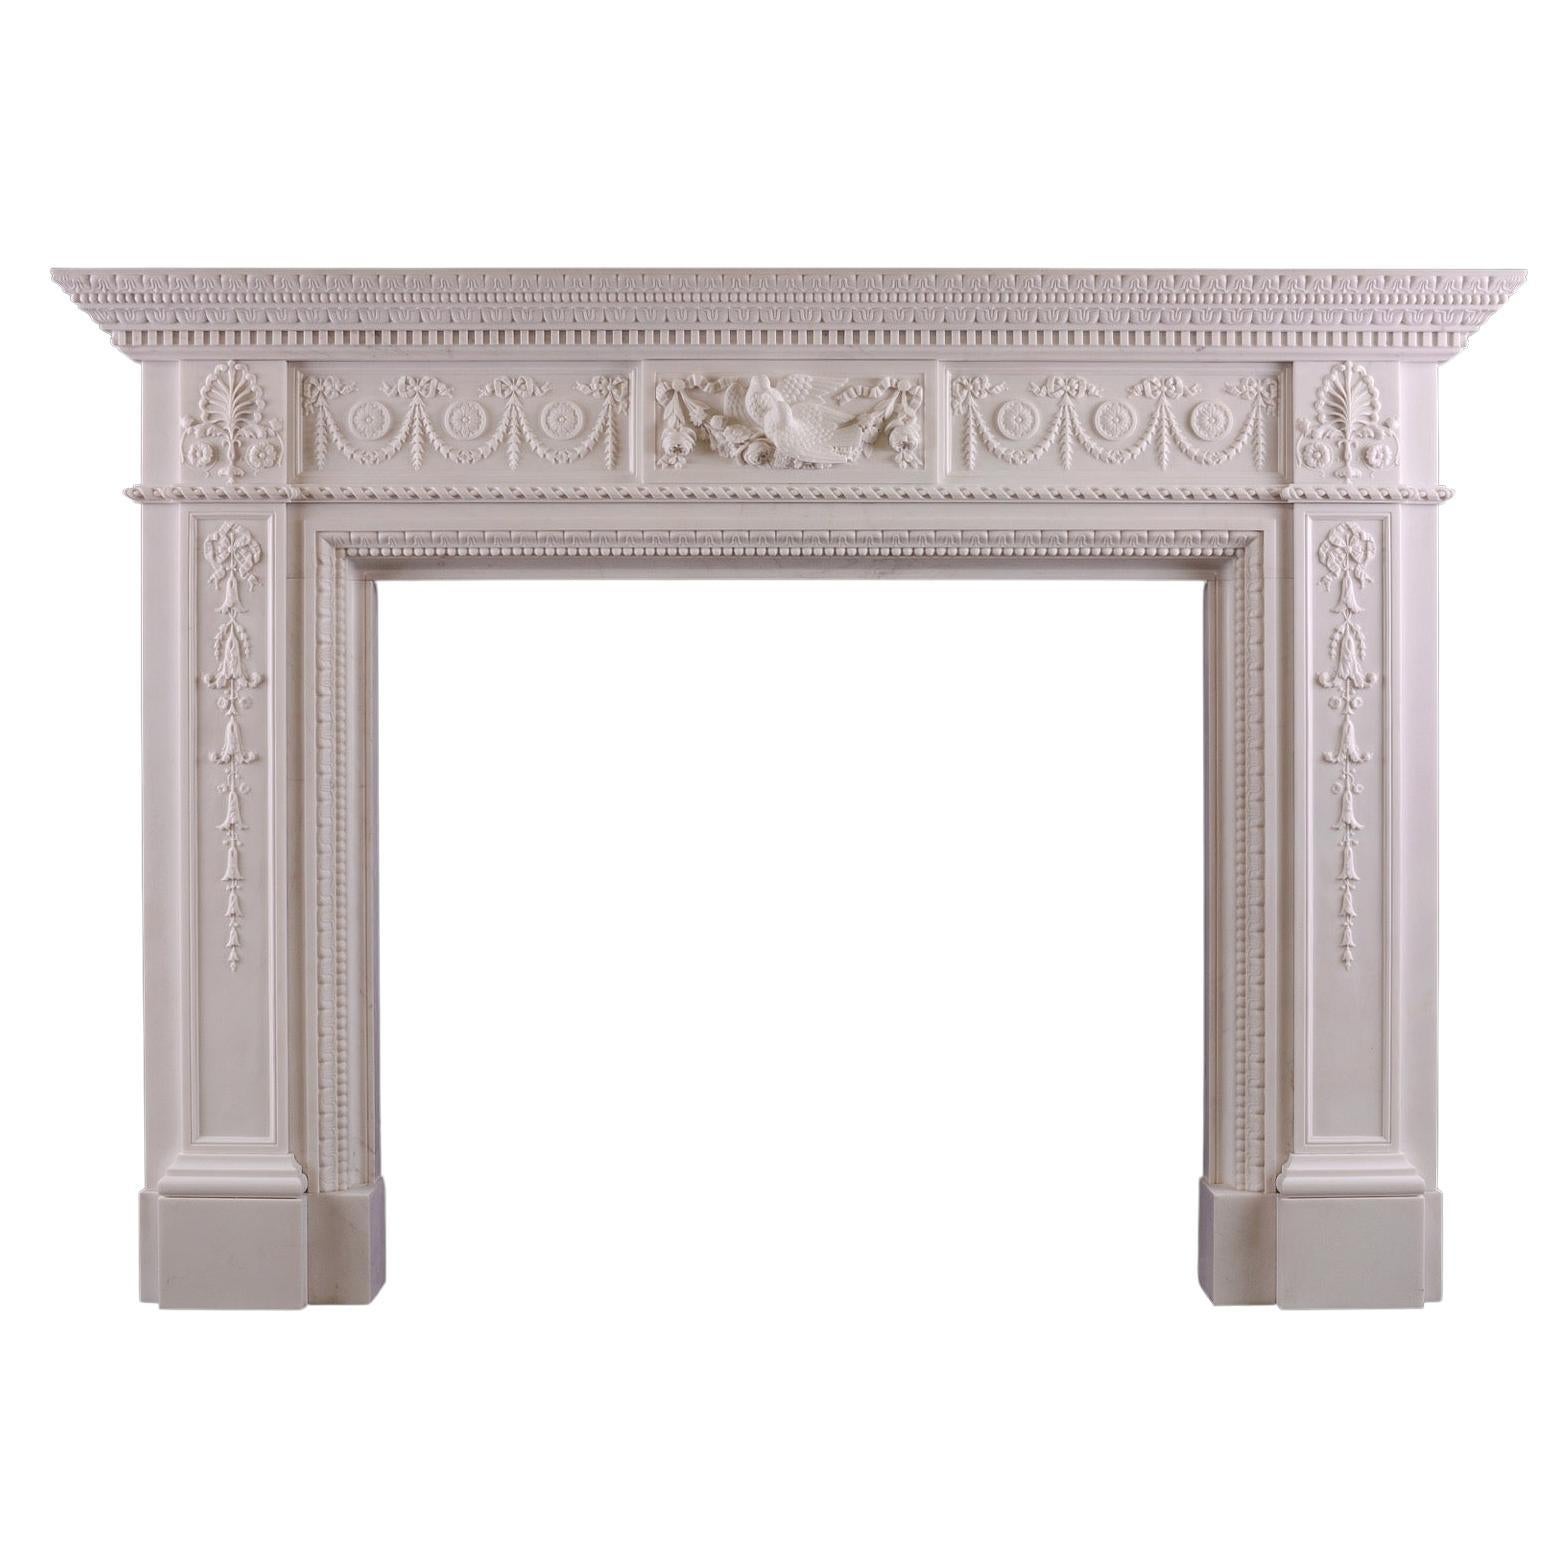 A Finely Carved White Marble Fireplace